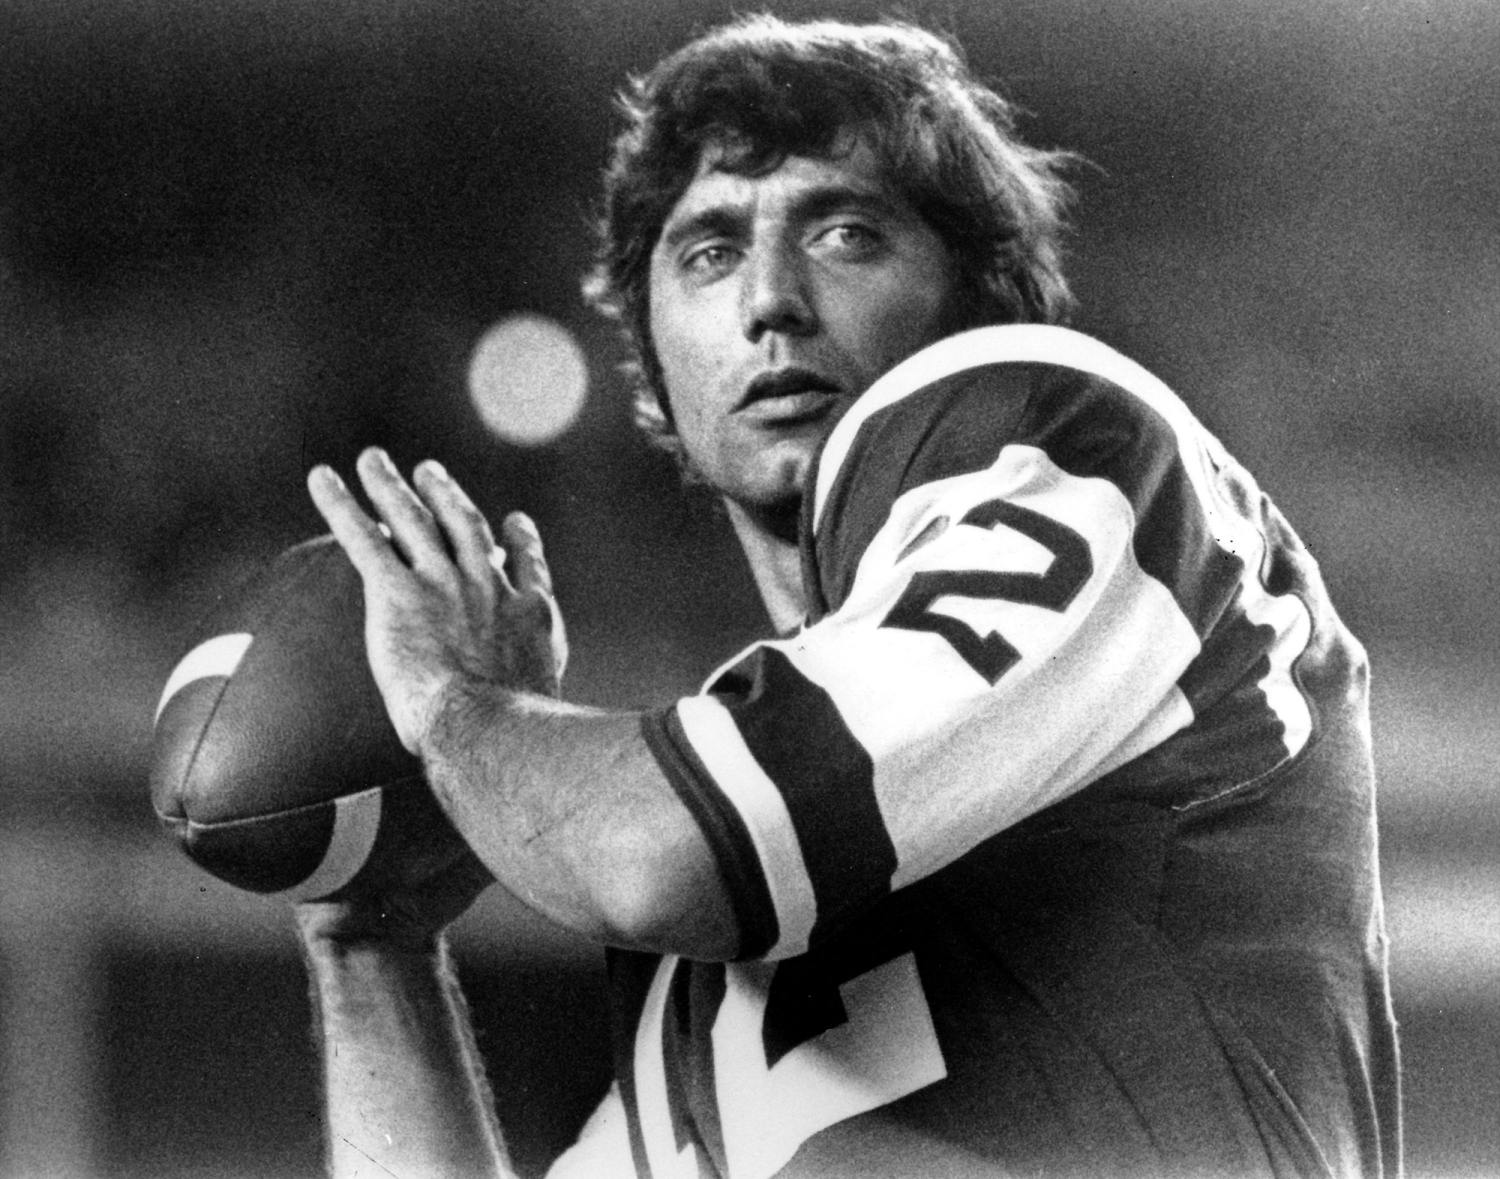 N.Y. Jets icon Joe Namath allegedly allowed sexual abuse at his camp, lawsuit says